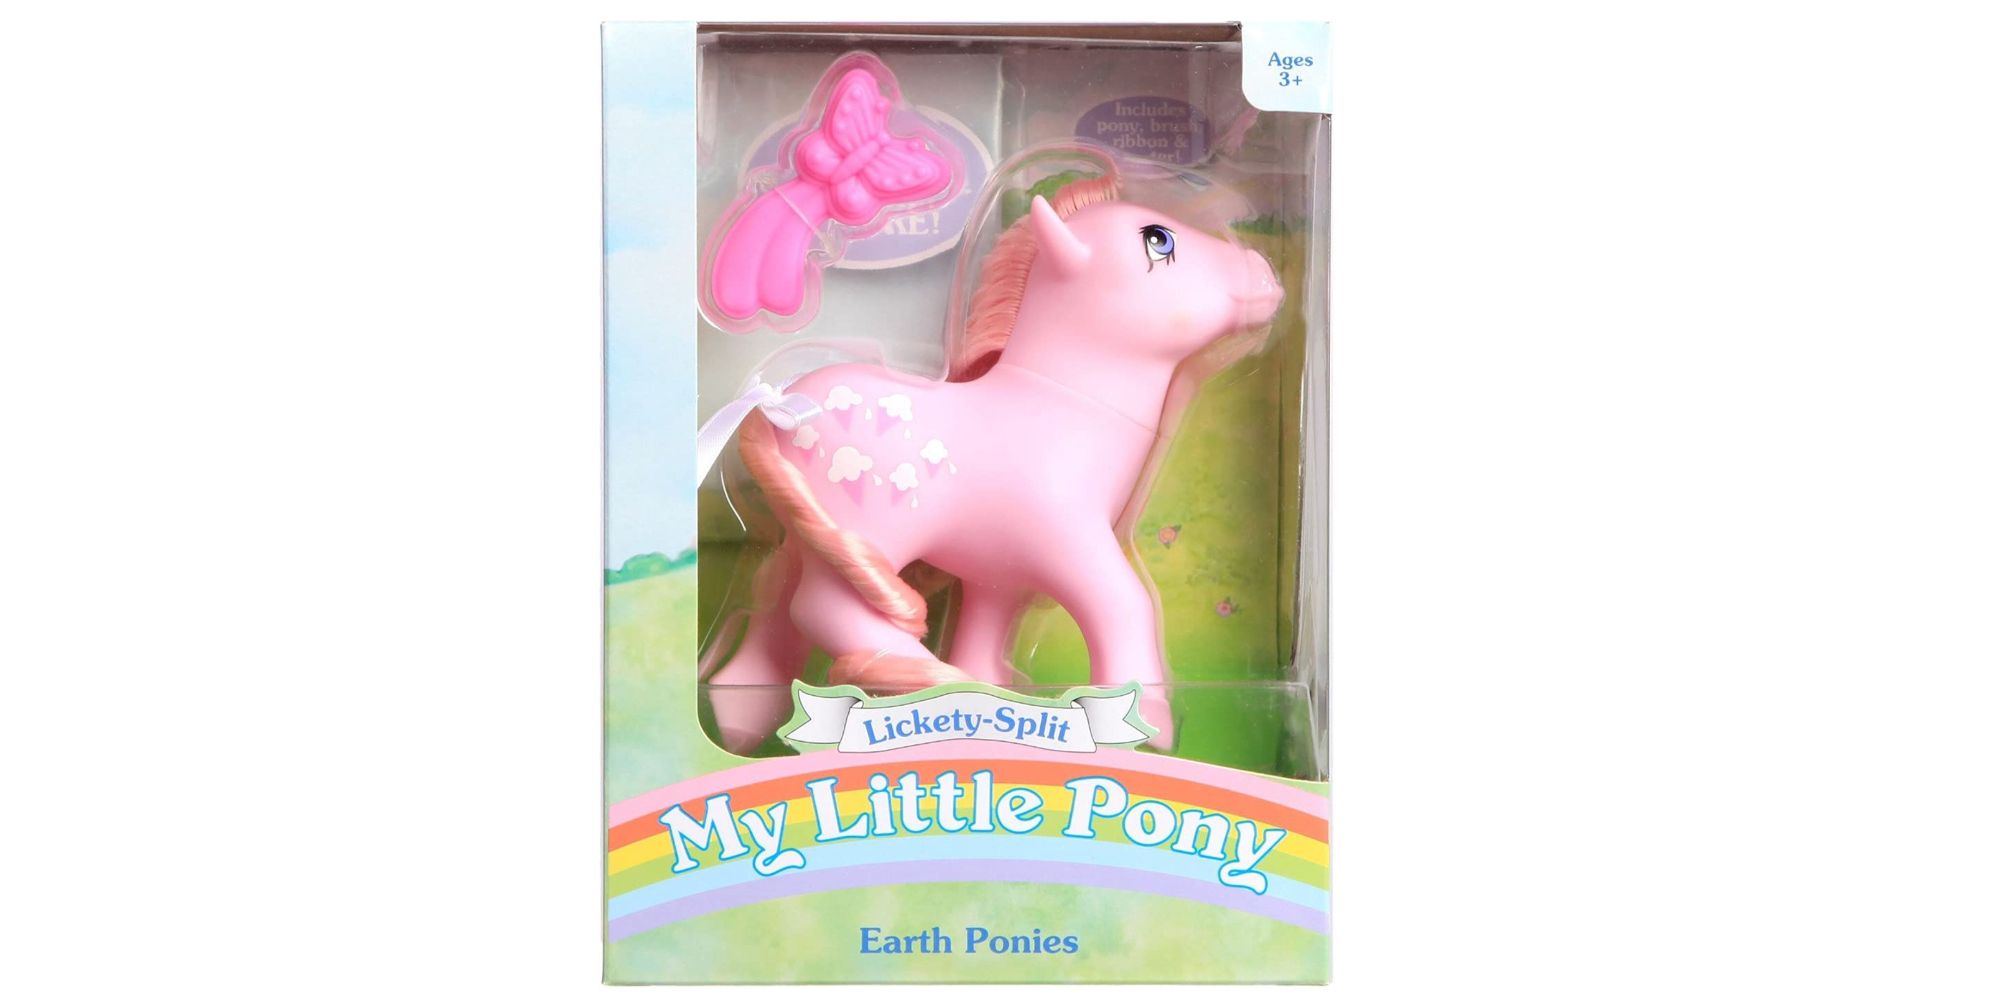 Classic My Little Pony from Amazon